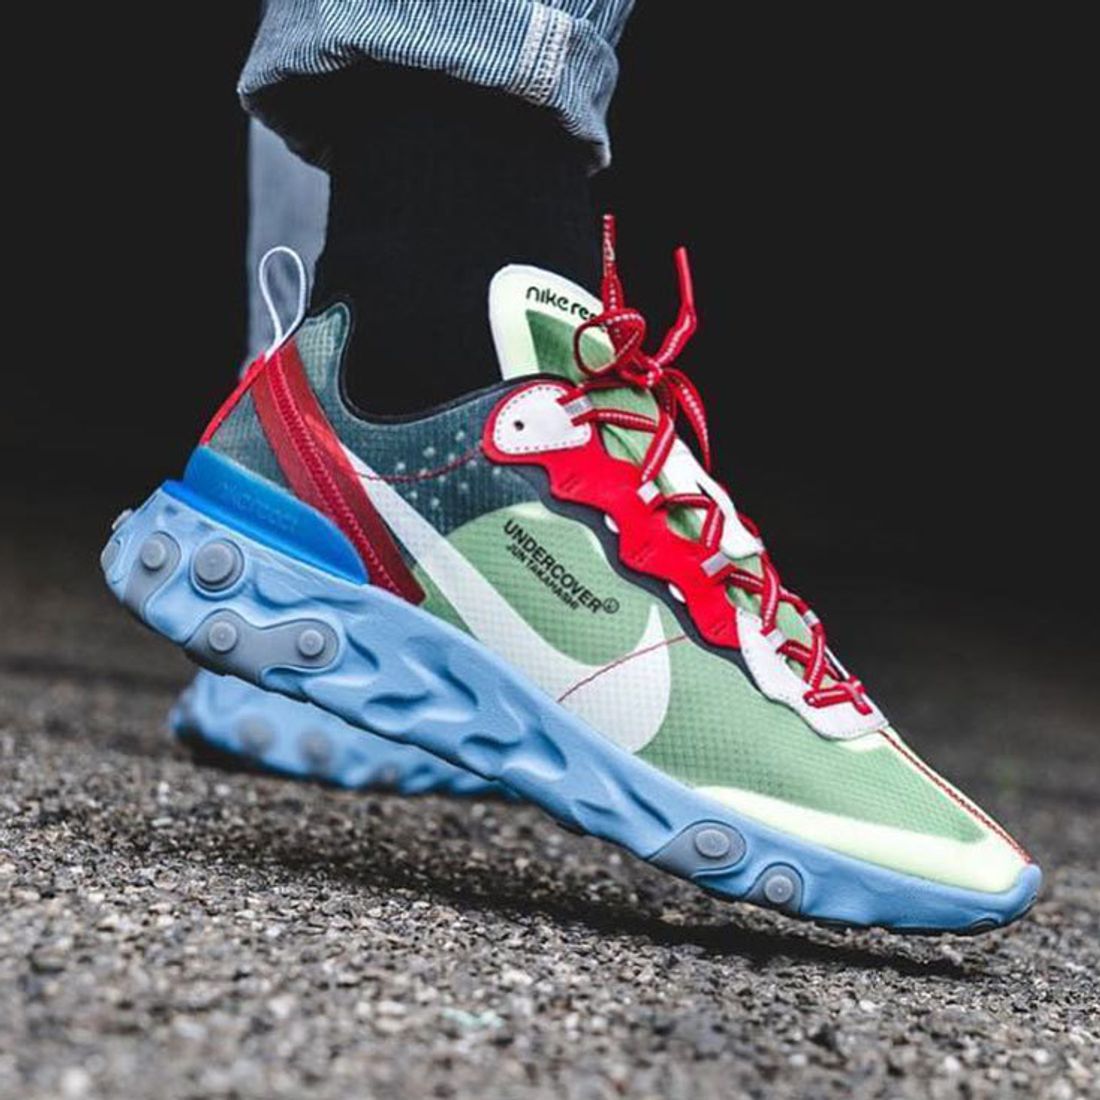 How People Are Styling the Undercover x React Element 87 - Sneaker Freaker